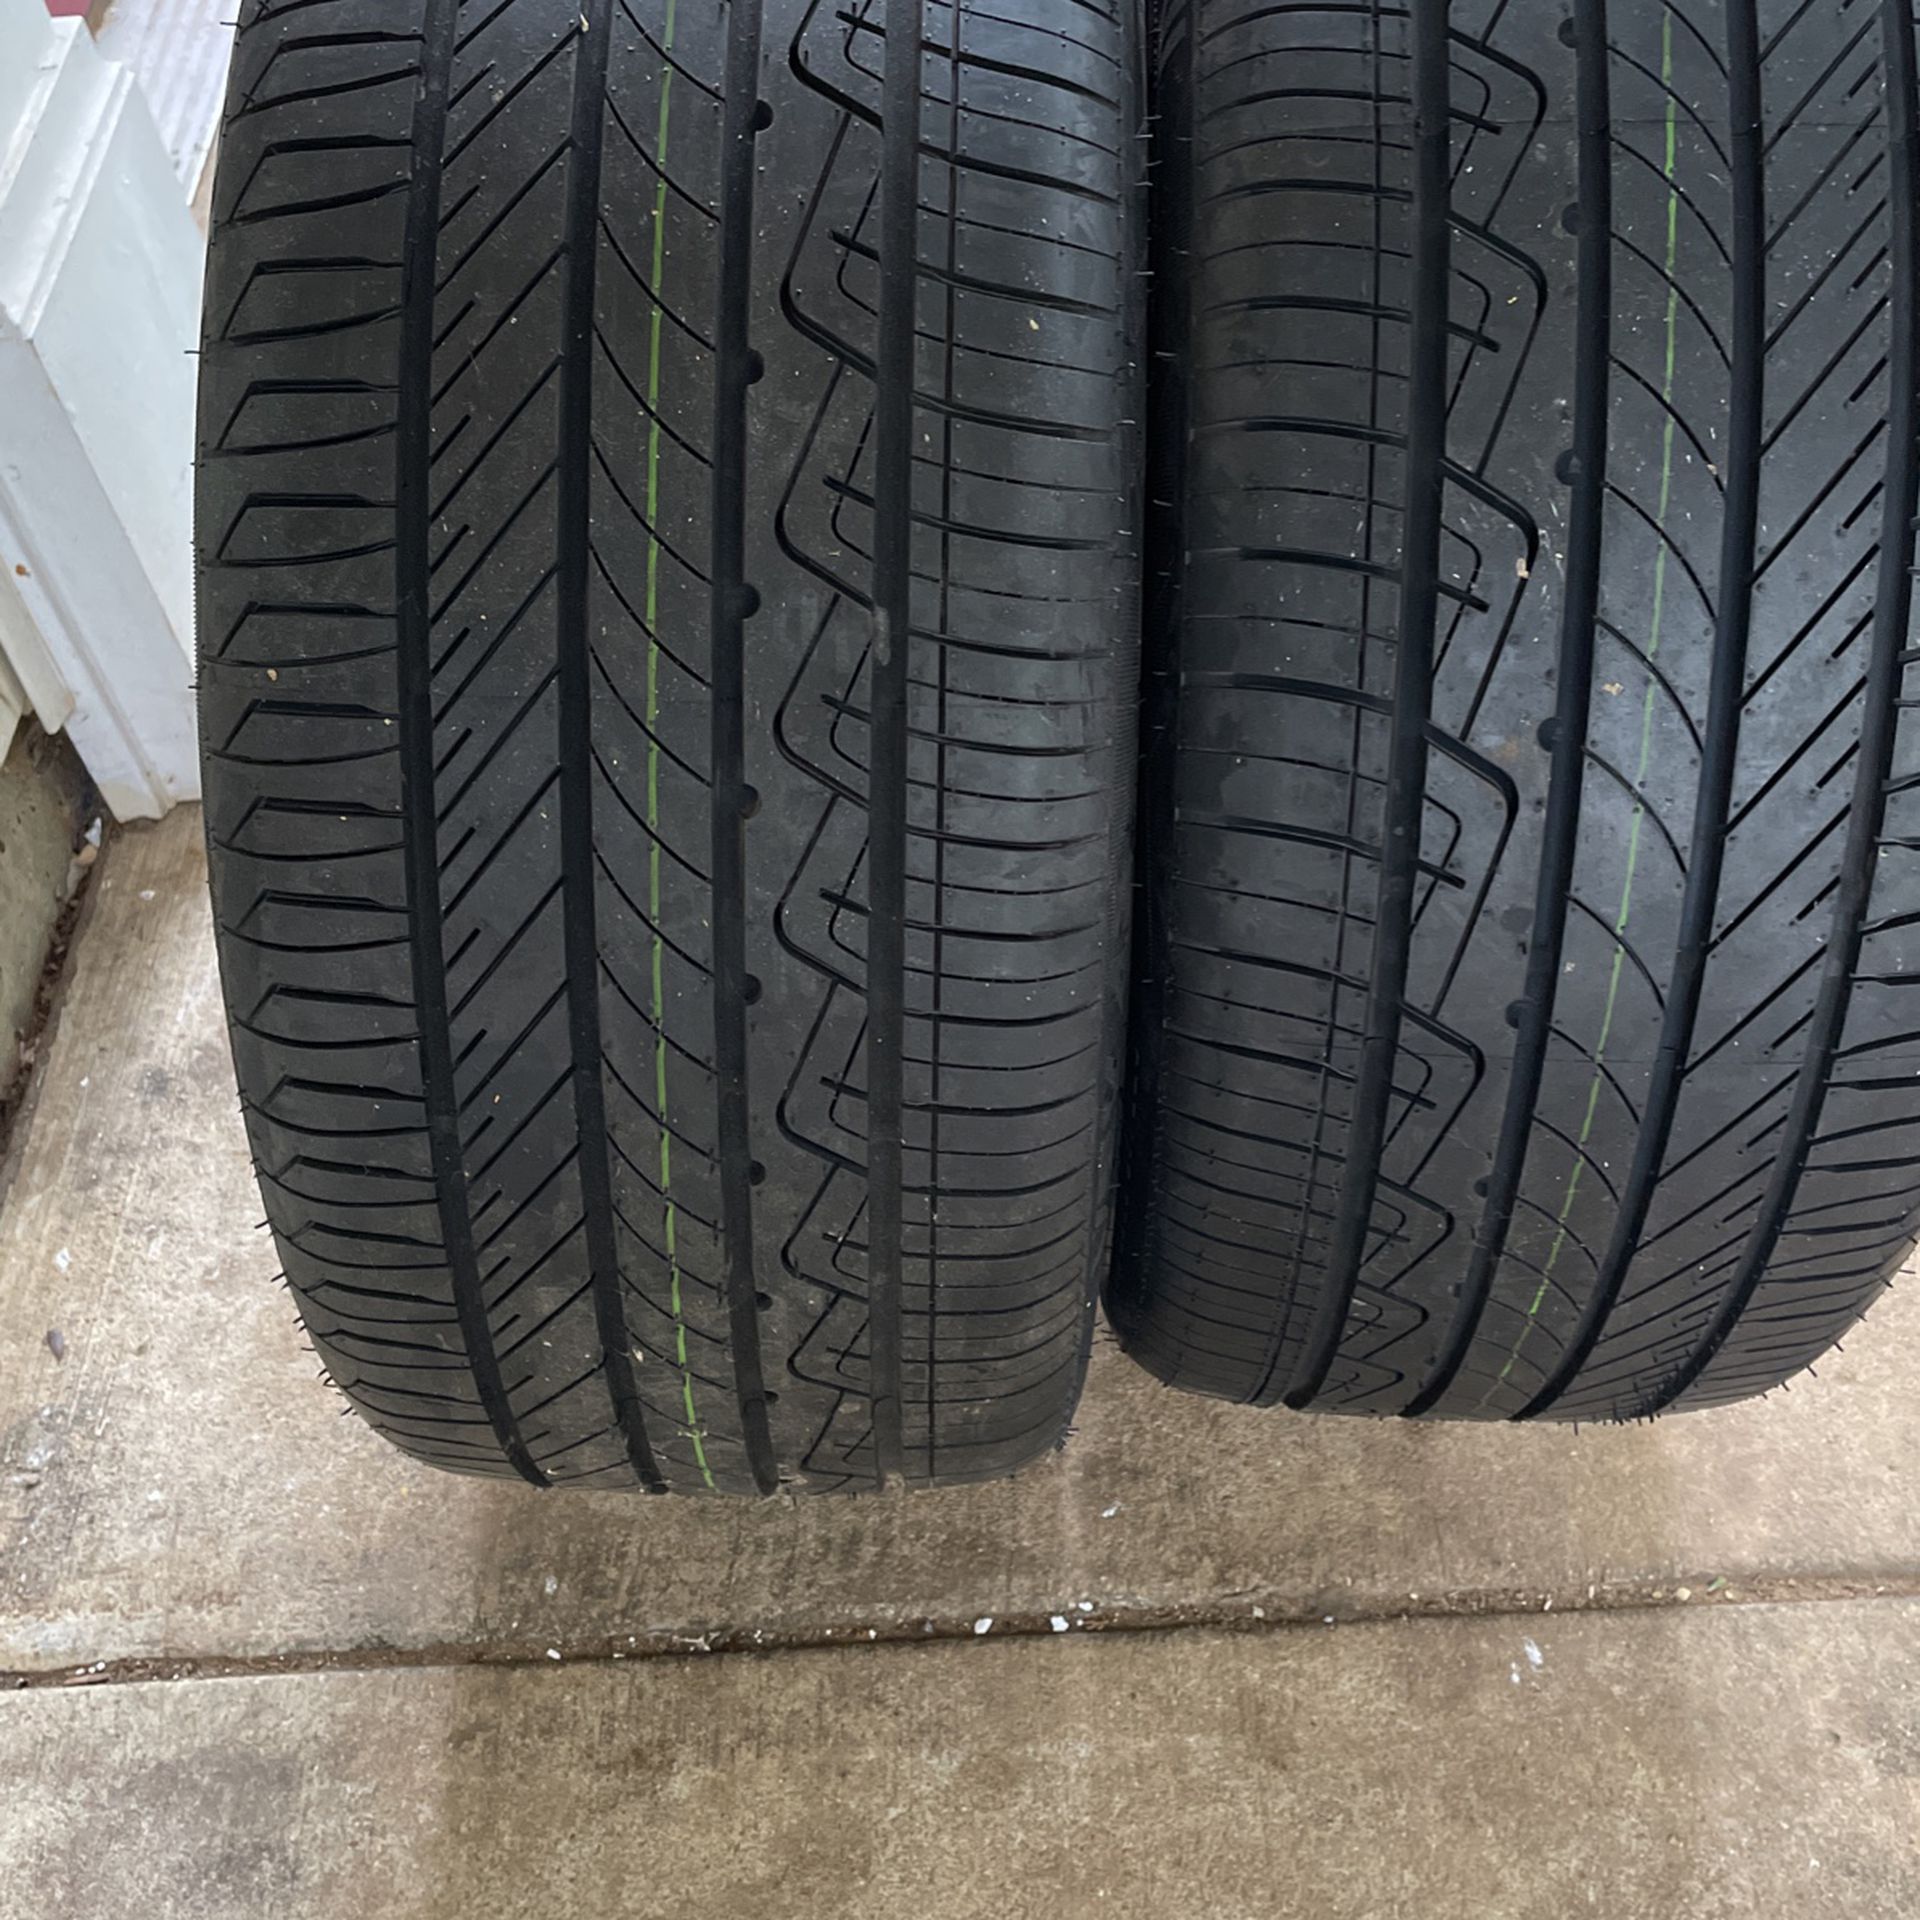 Tires 275/40zr20 Y Speed Rated 